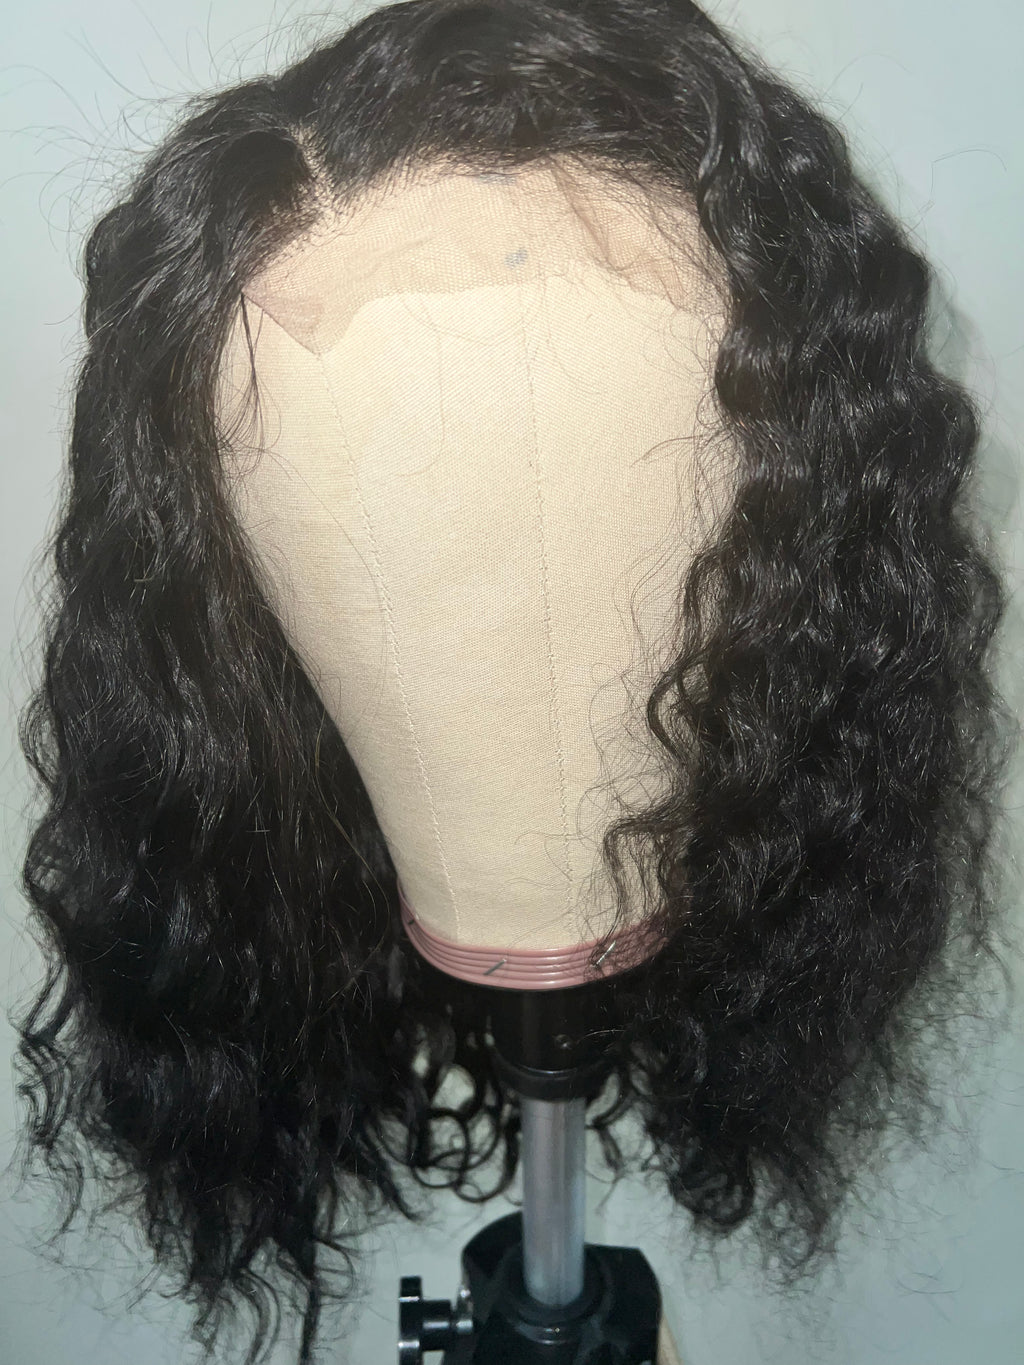 12" Passion Wave Double Drawn Closure Wig